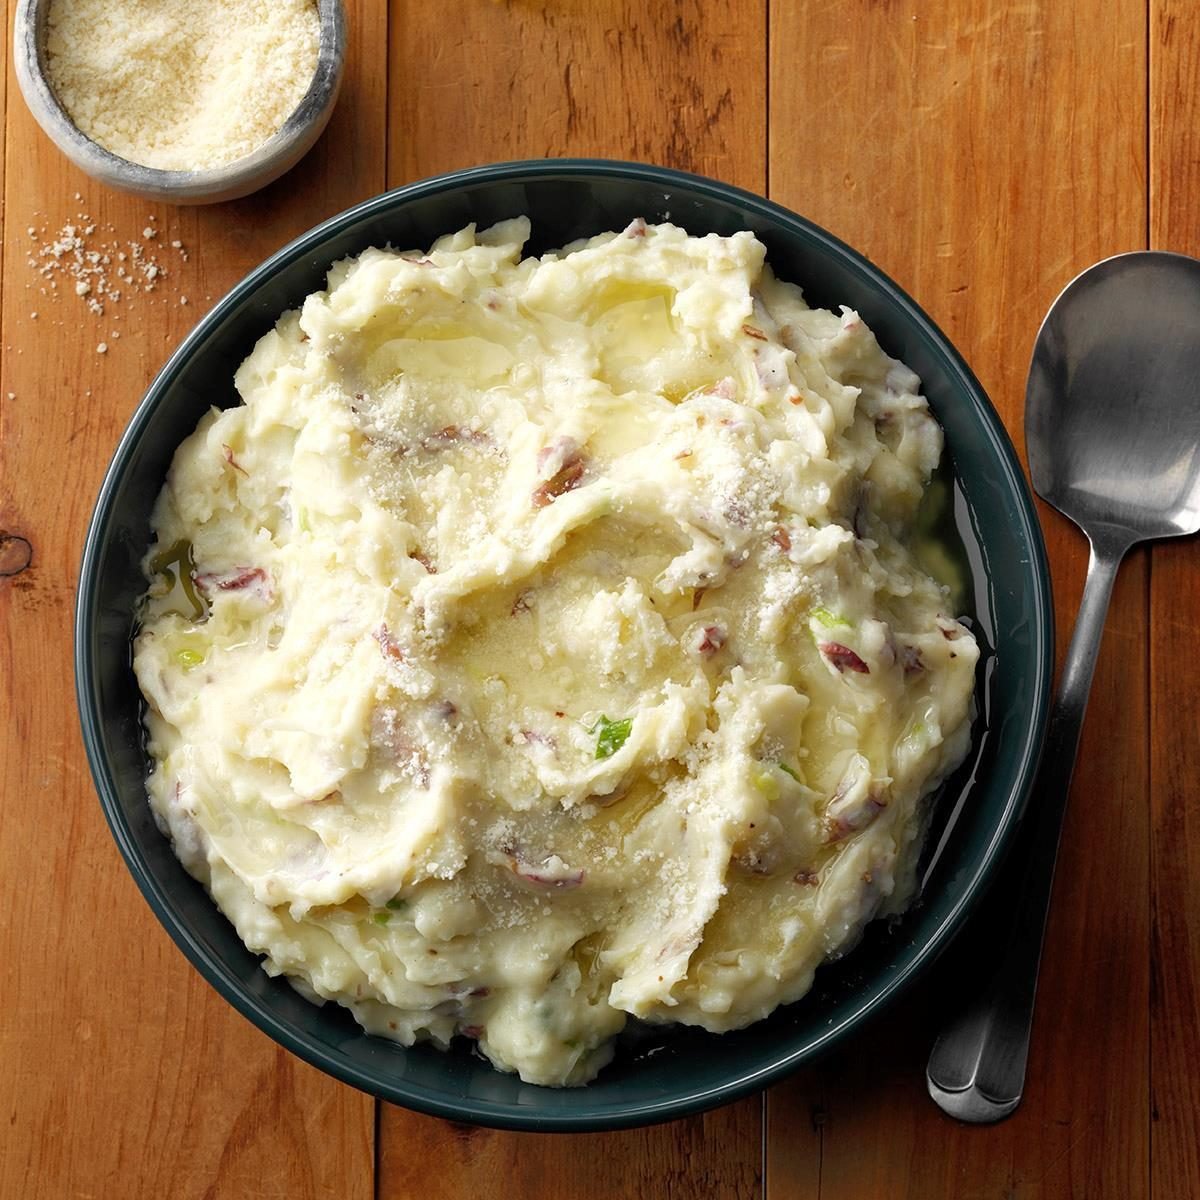 Mashed Potatoes with Garlic-Olive Oil